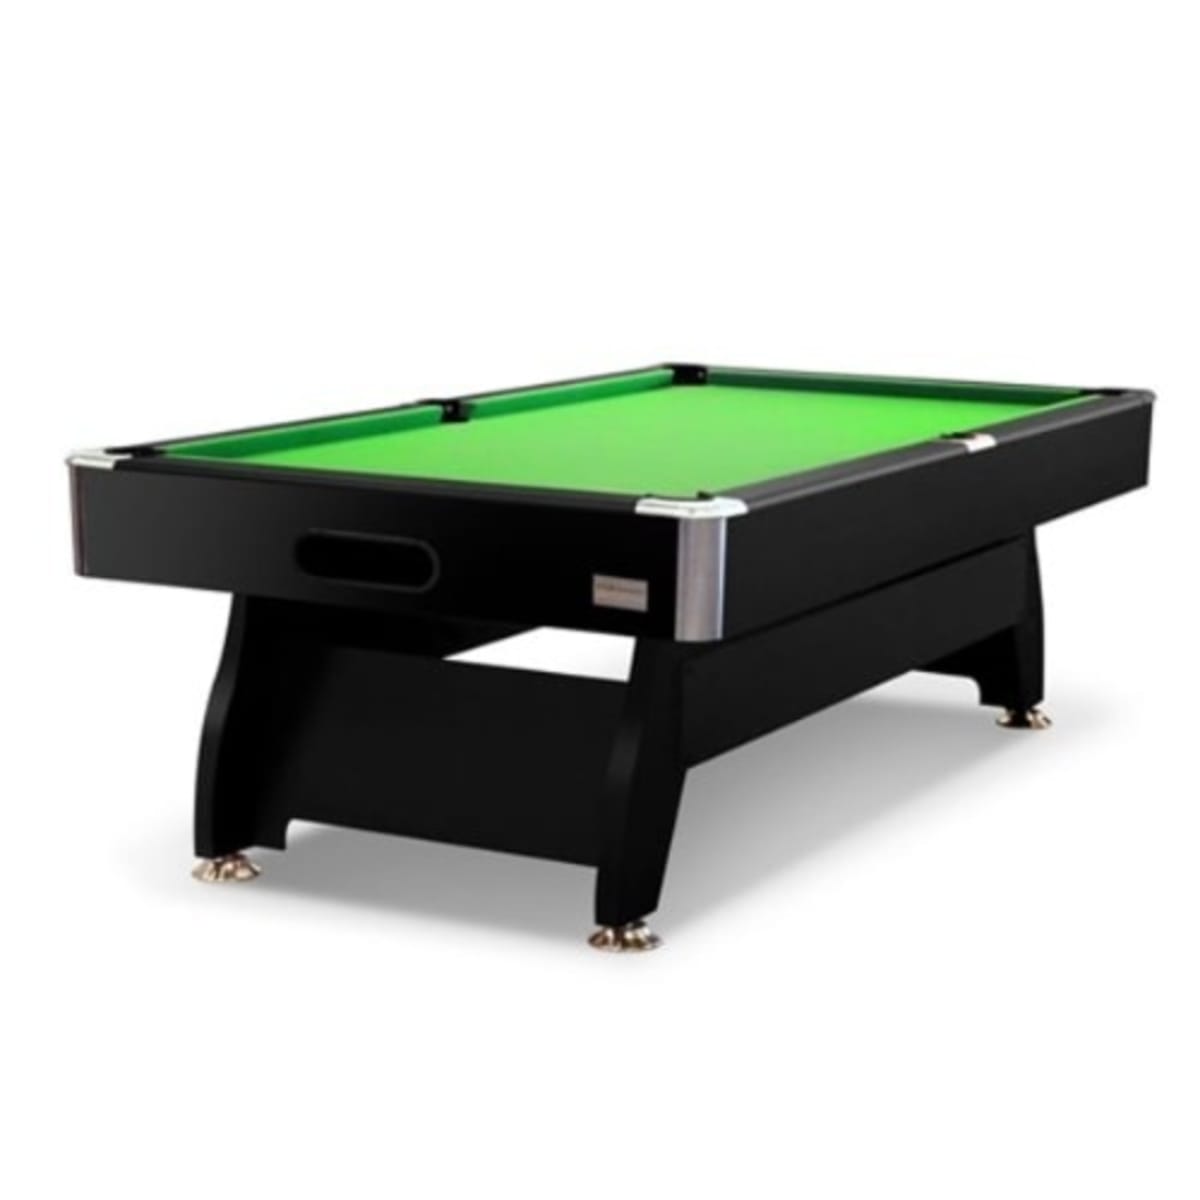 Snooker Board With Complete Accessories